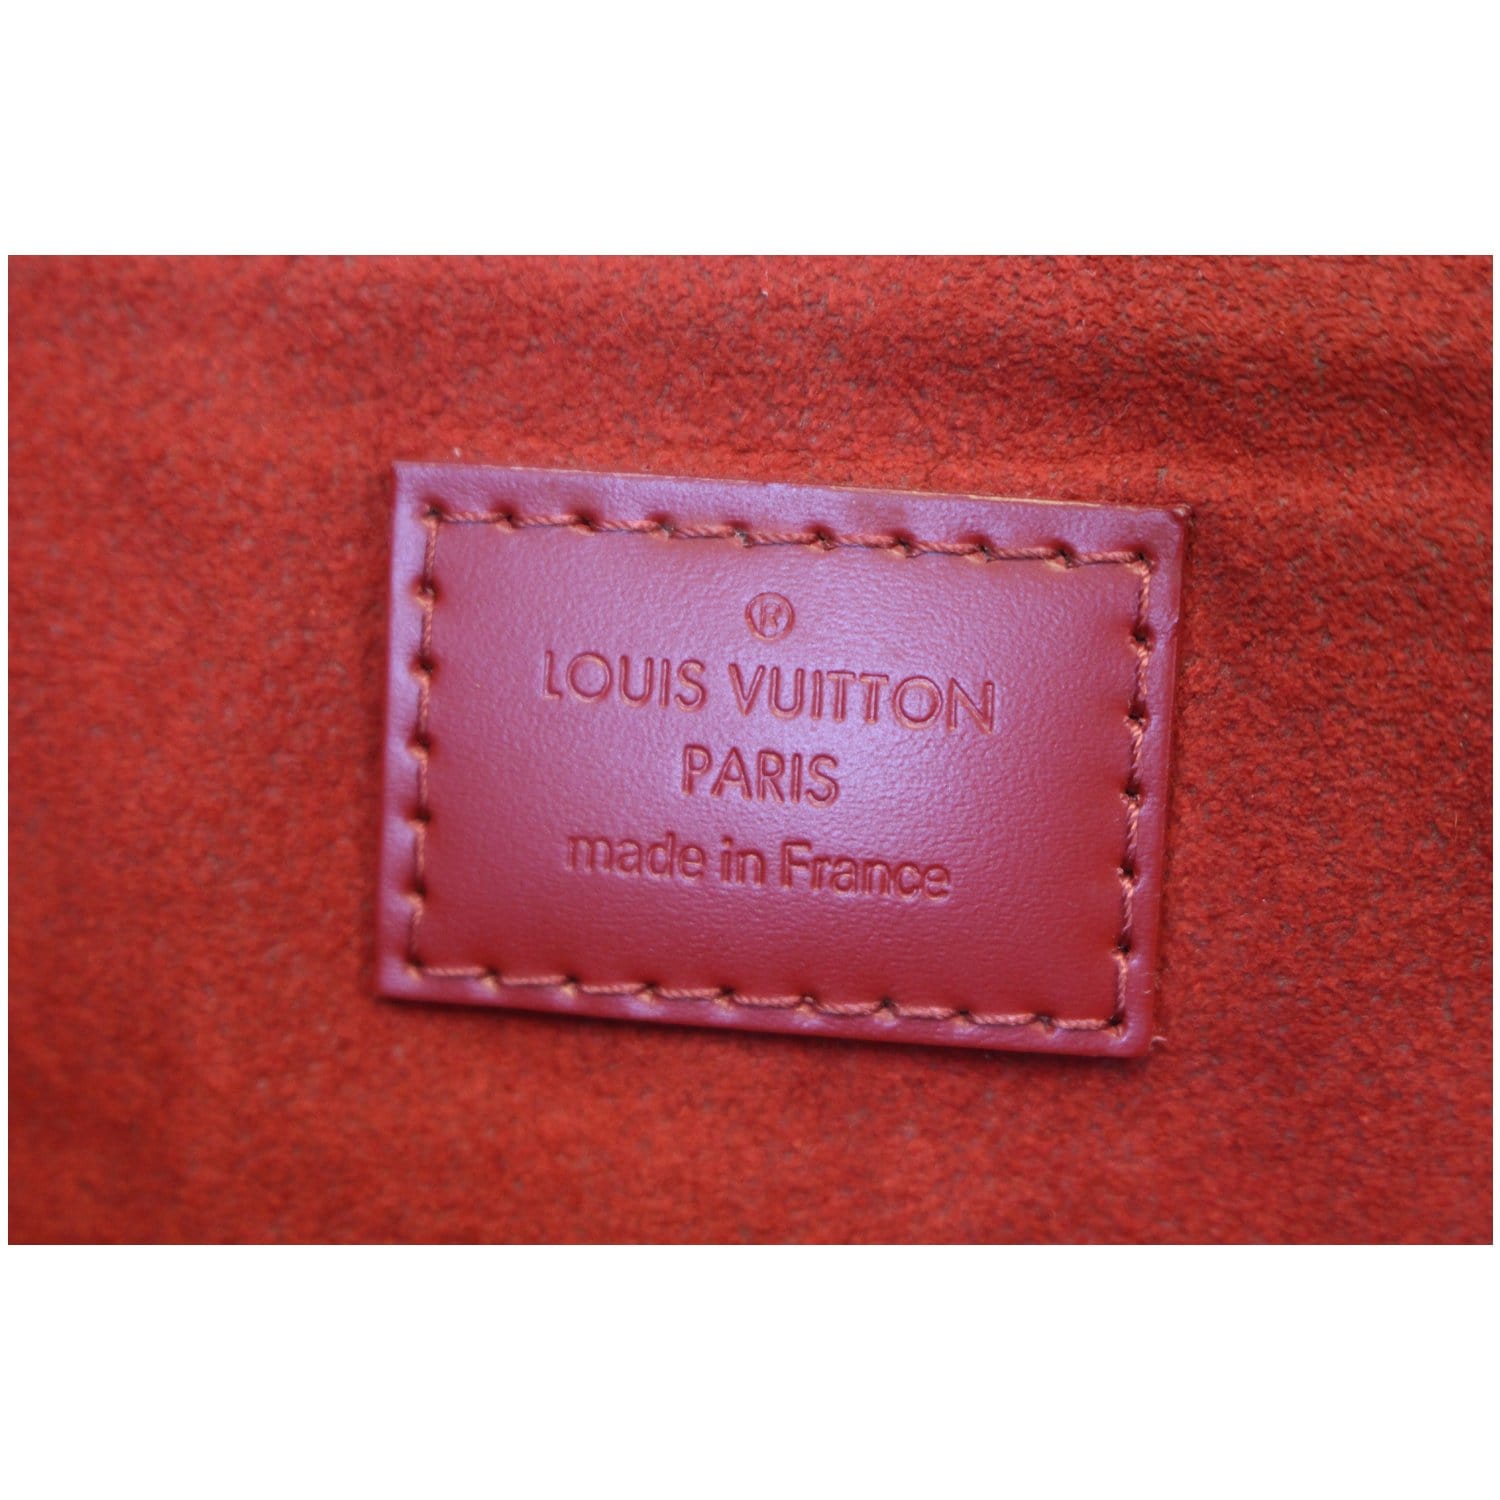 LOUIS VUITTON Caissa Tote MM Tote Bag N41548｜Product  Code：2101213722159｜BRAND OFF Online Store